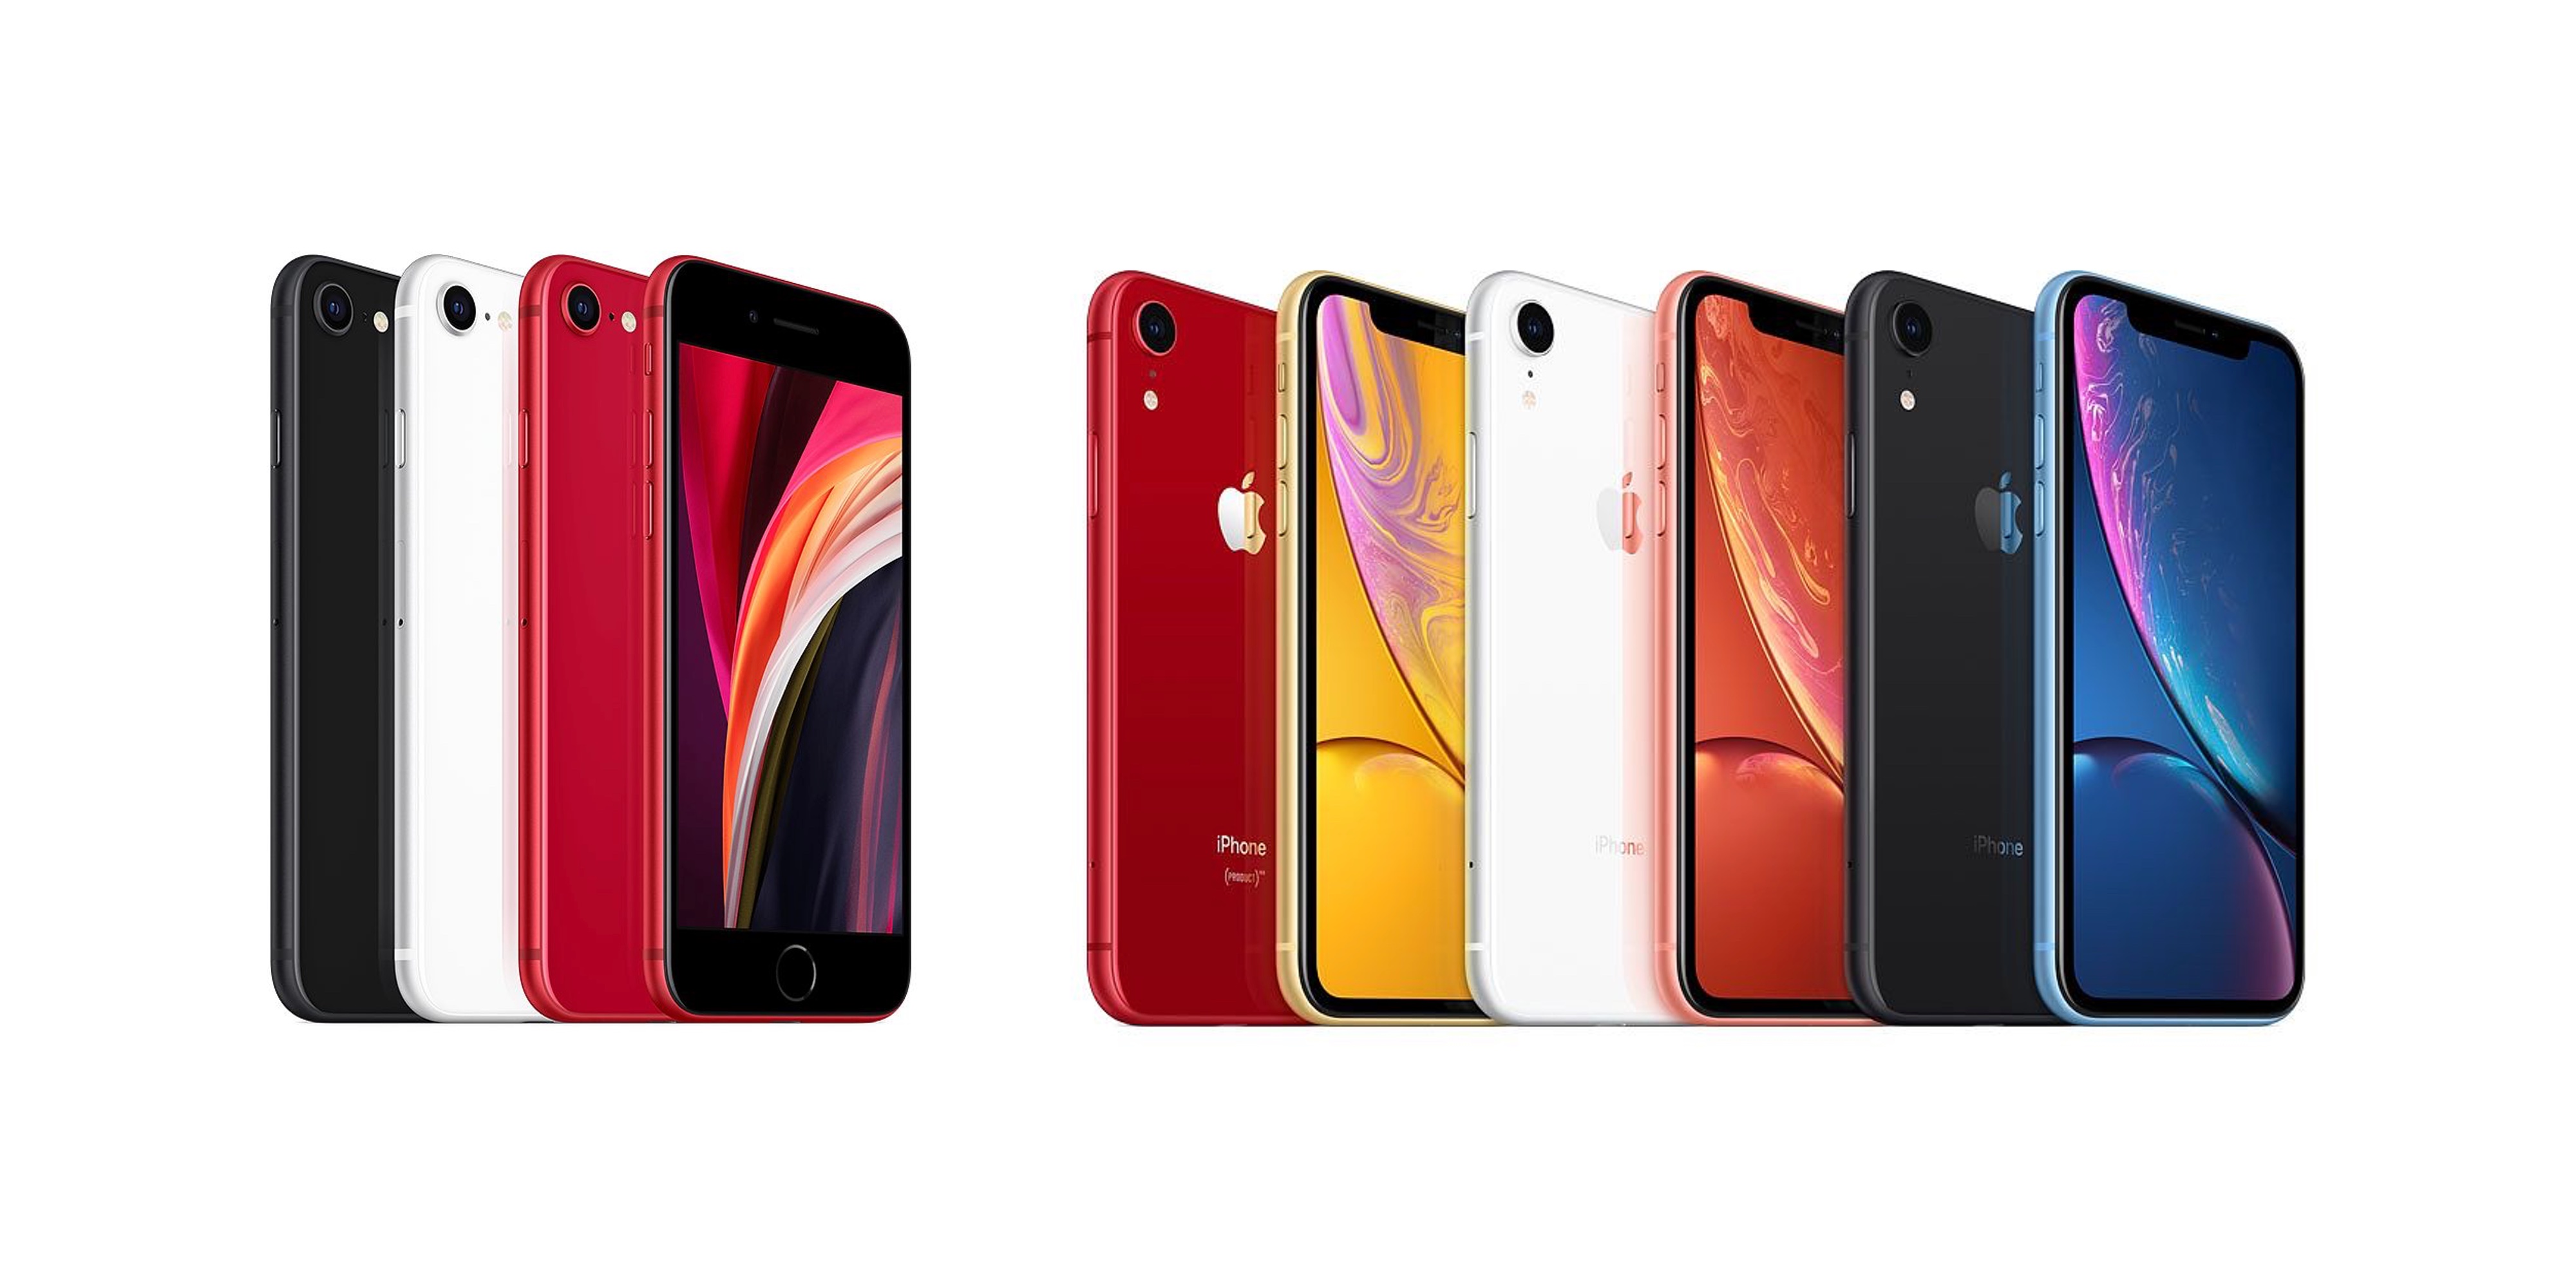 iPhone SE vs iPhone XR comparison: Which should you buy? - 9to5Mac